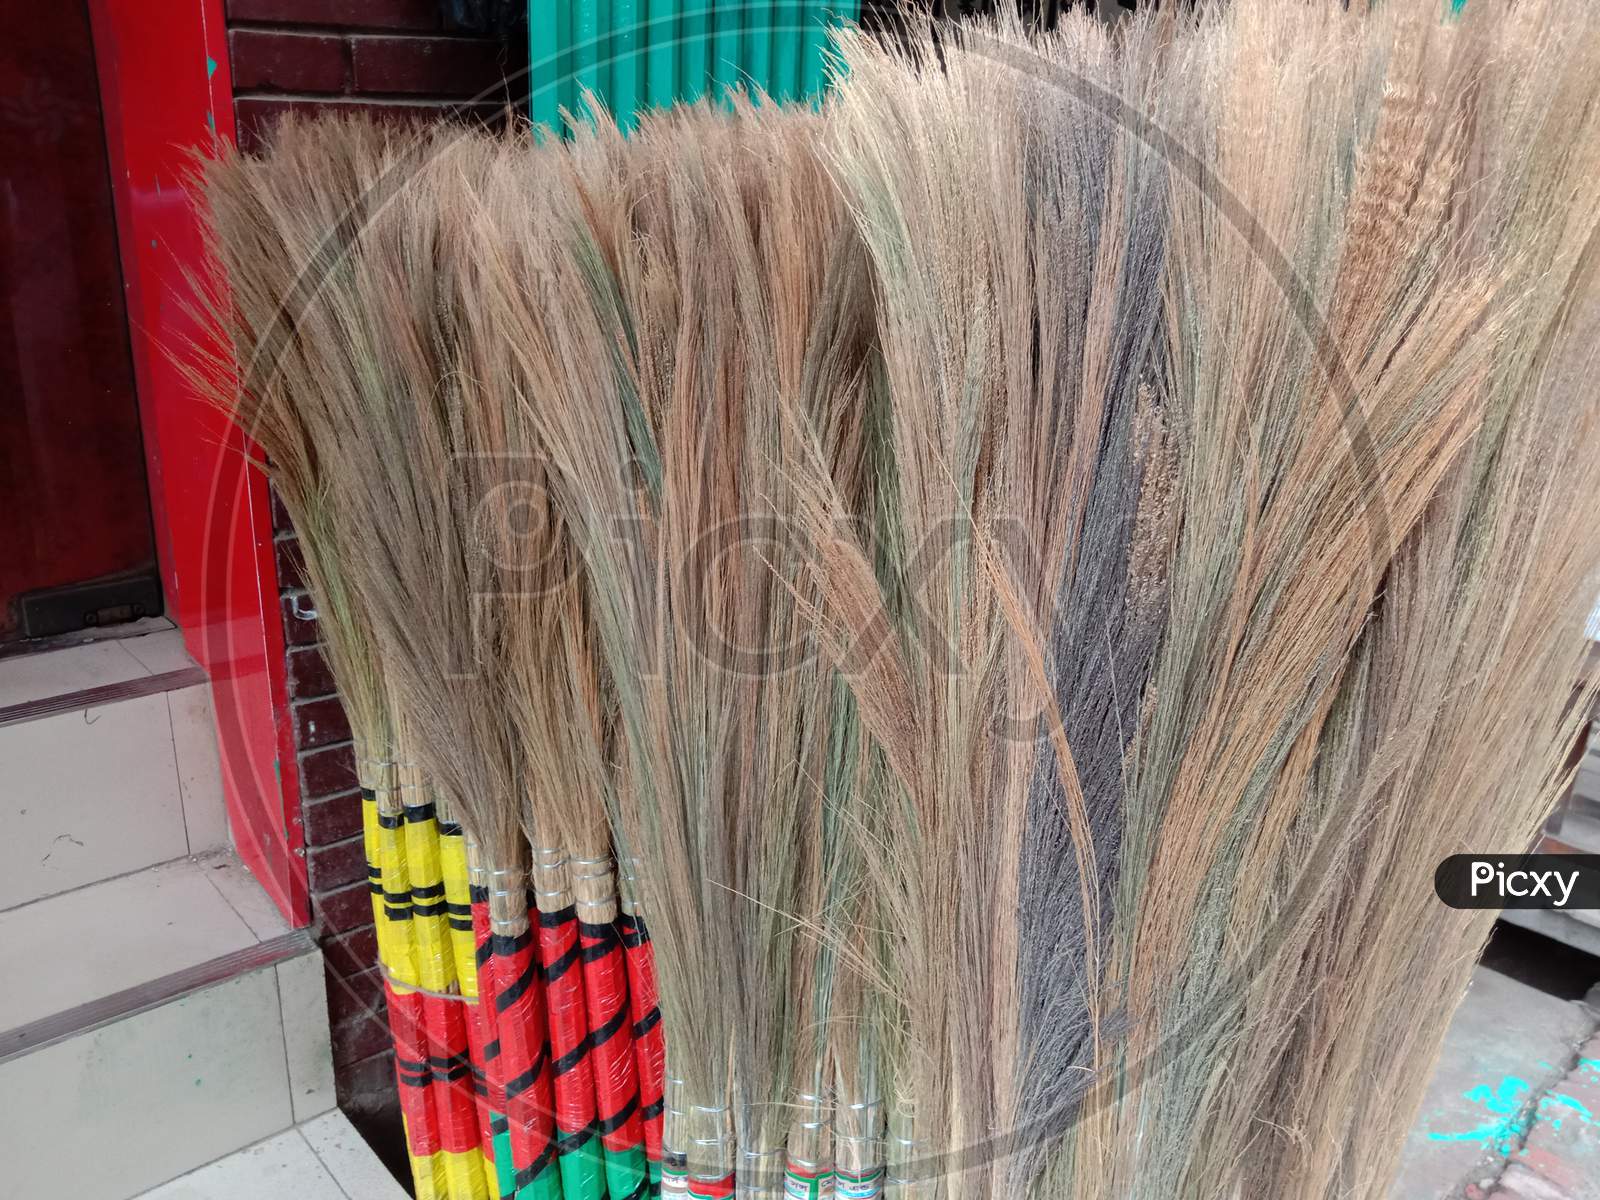 Broom Stock On Shop For Sell